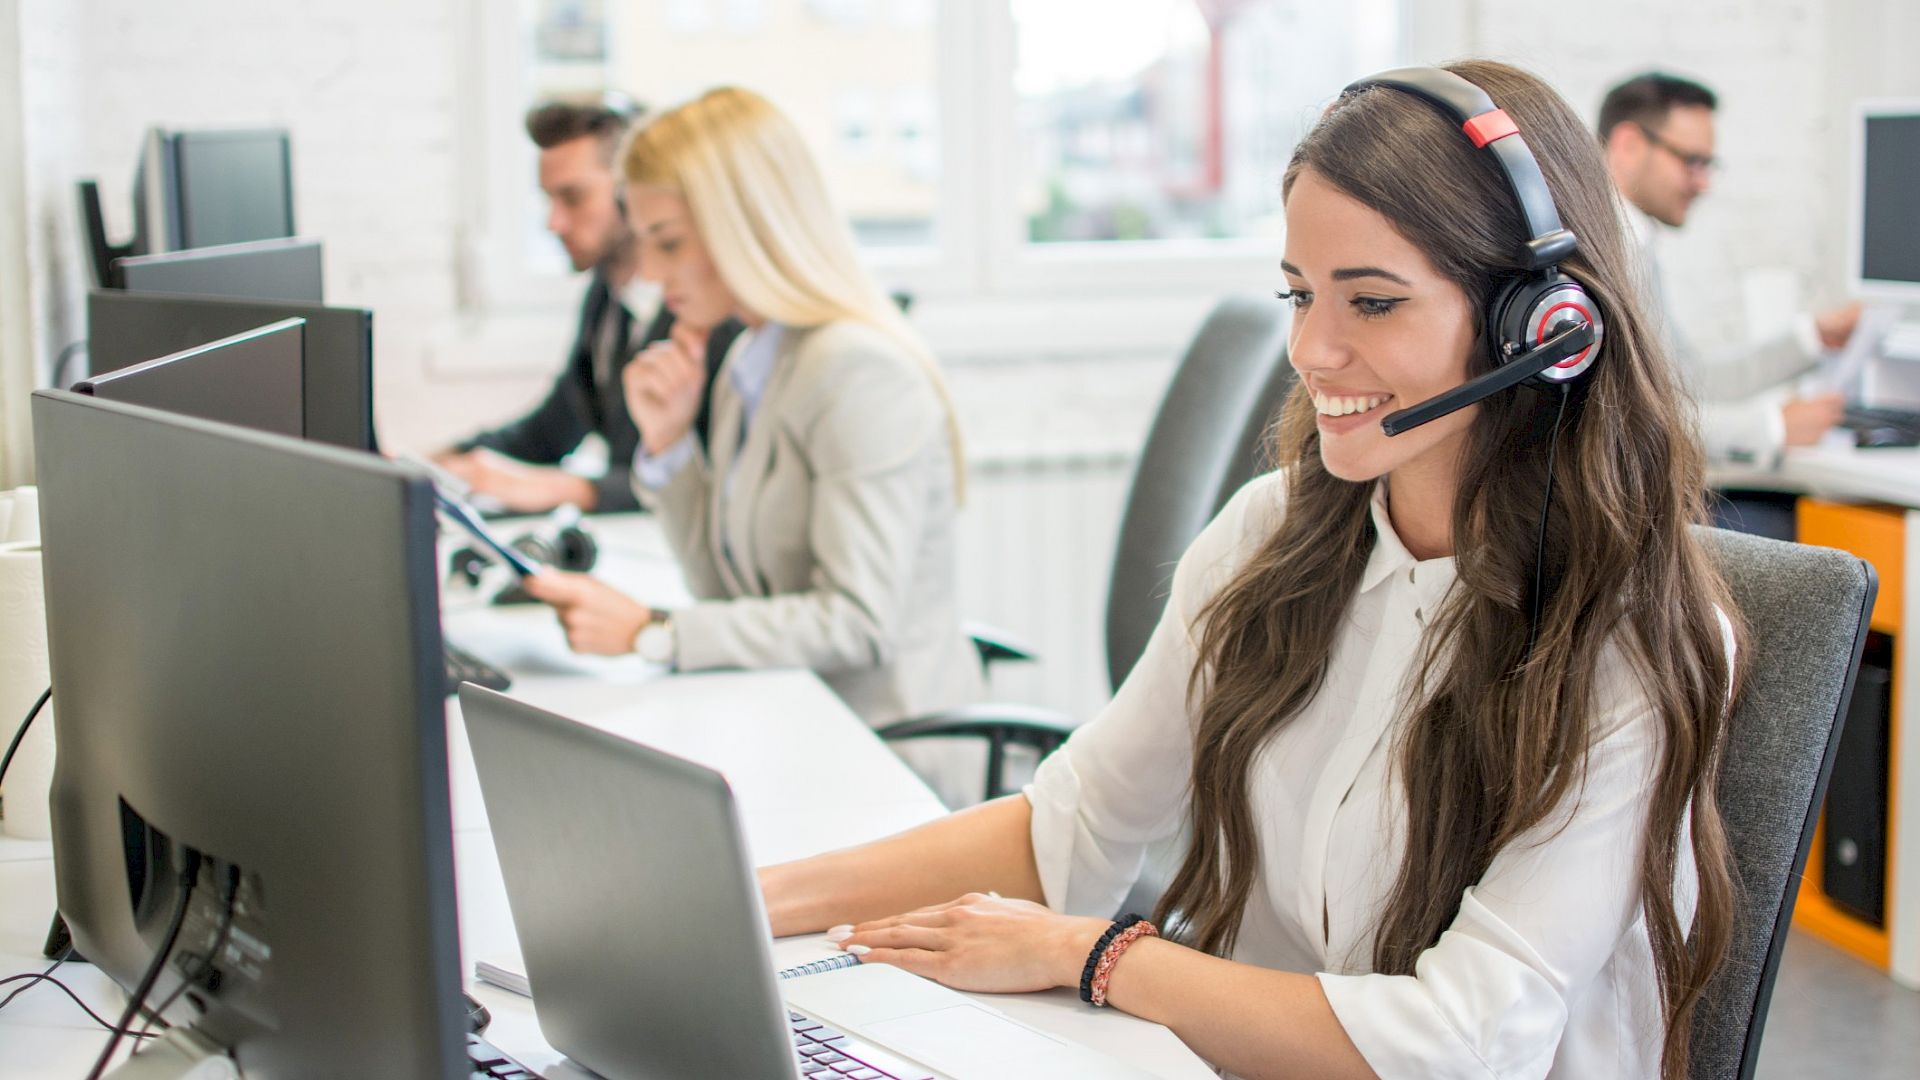 Young female customer service agen wearing a headset an smiling in front of computer screen